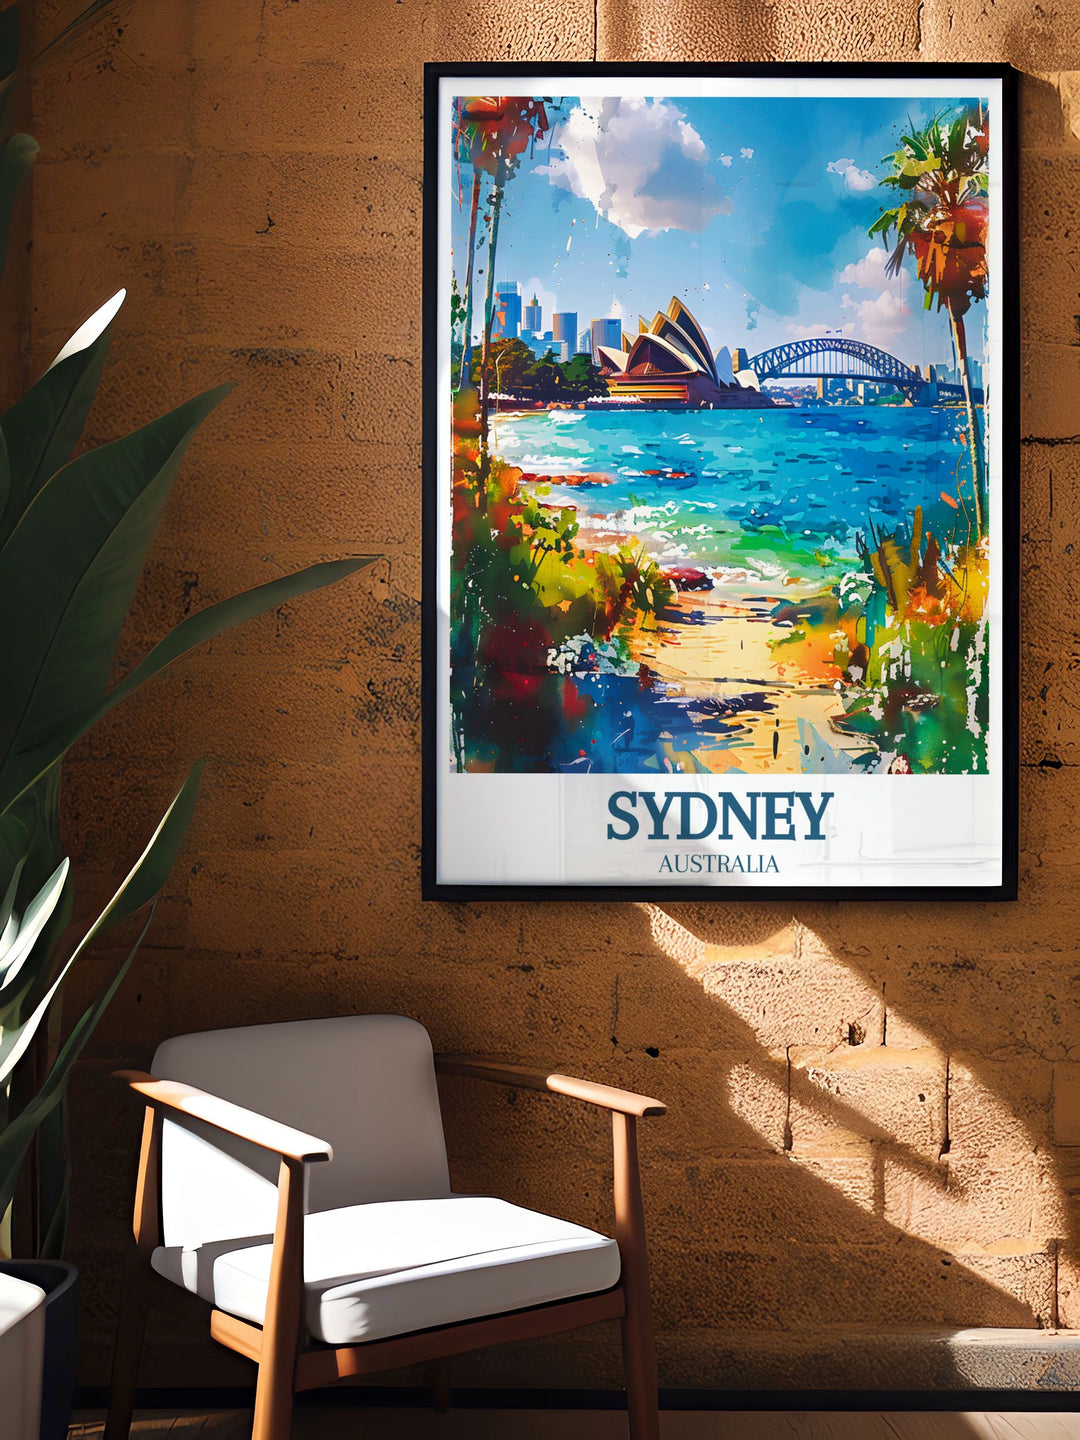 Timeless Sydney Opera House and Sydney Harbour Bridge artwork in a retro travel poster style perfect for decorating your home with a piece of Australian heritage and evoking a sense of adventure and beauty